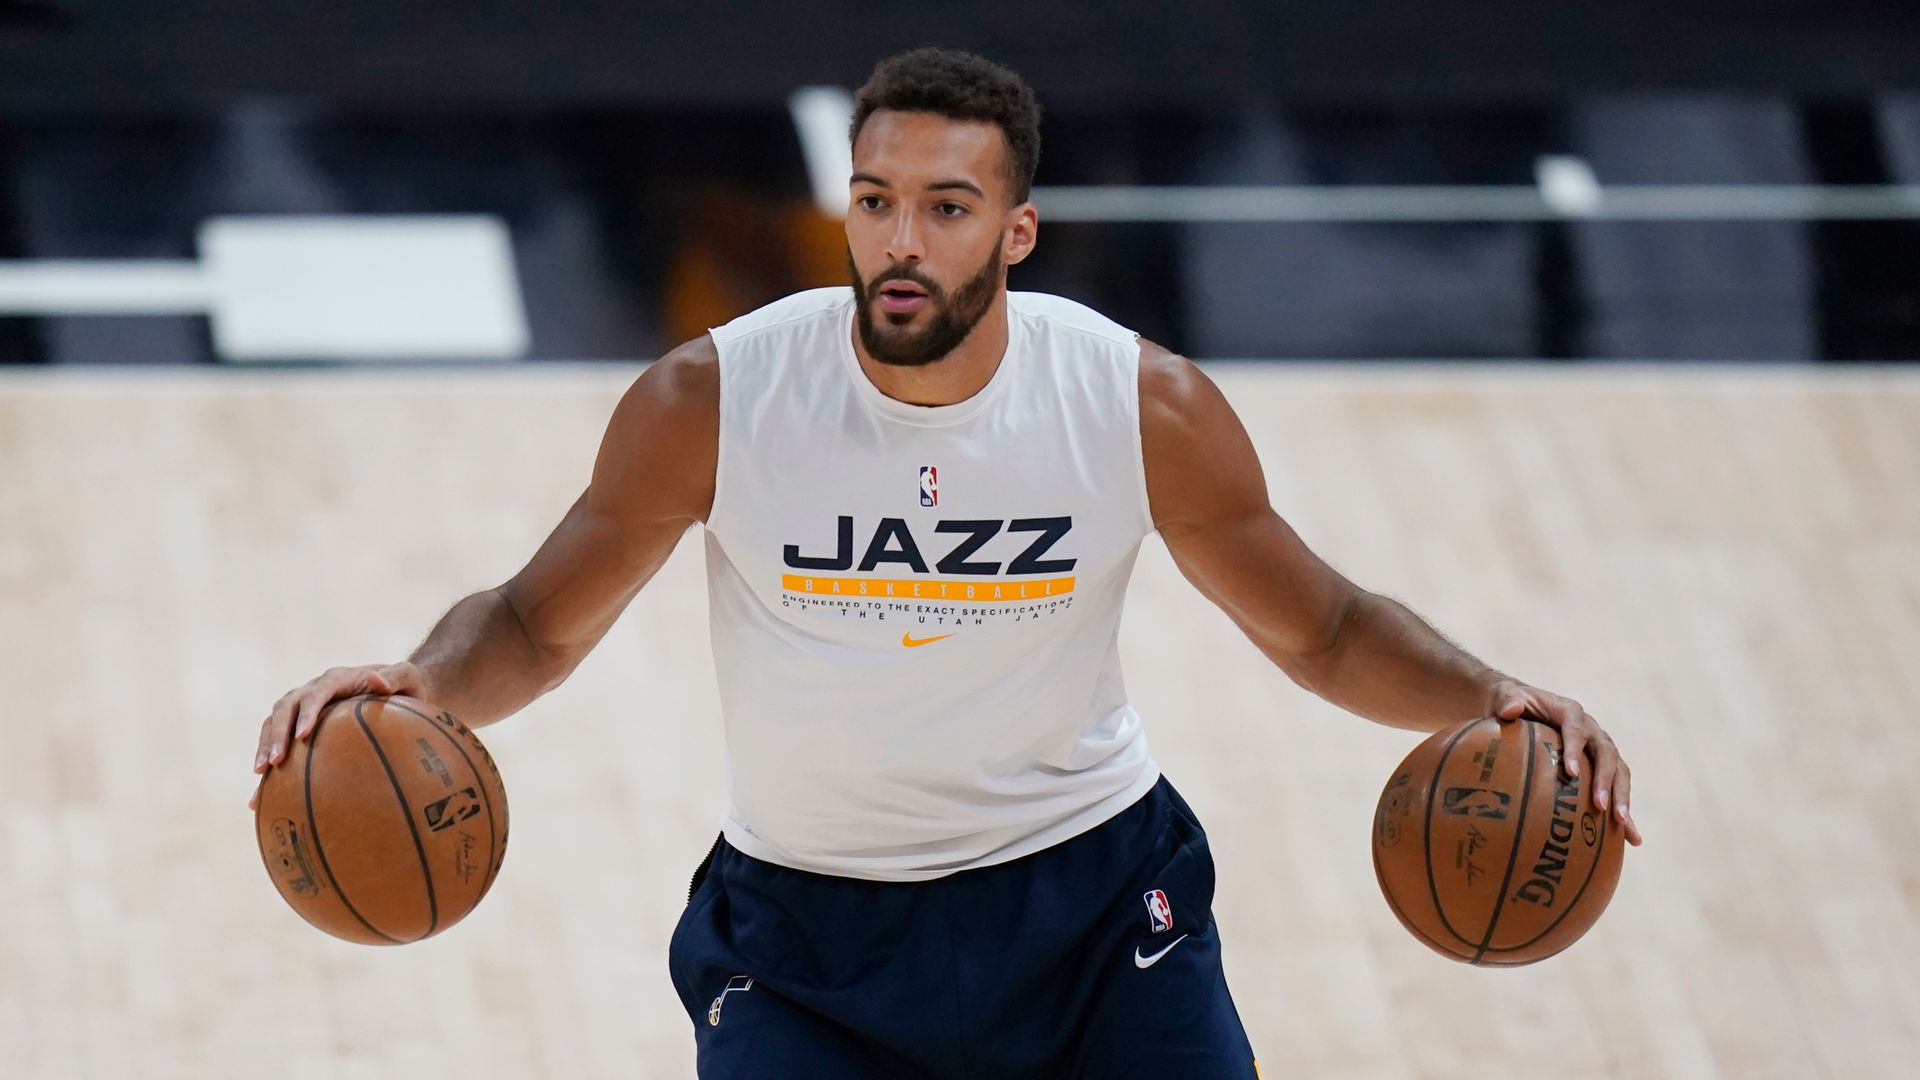 Utah Jazz's Rudy Gobert named Defensive Player of the Year for third